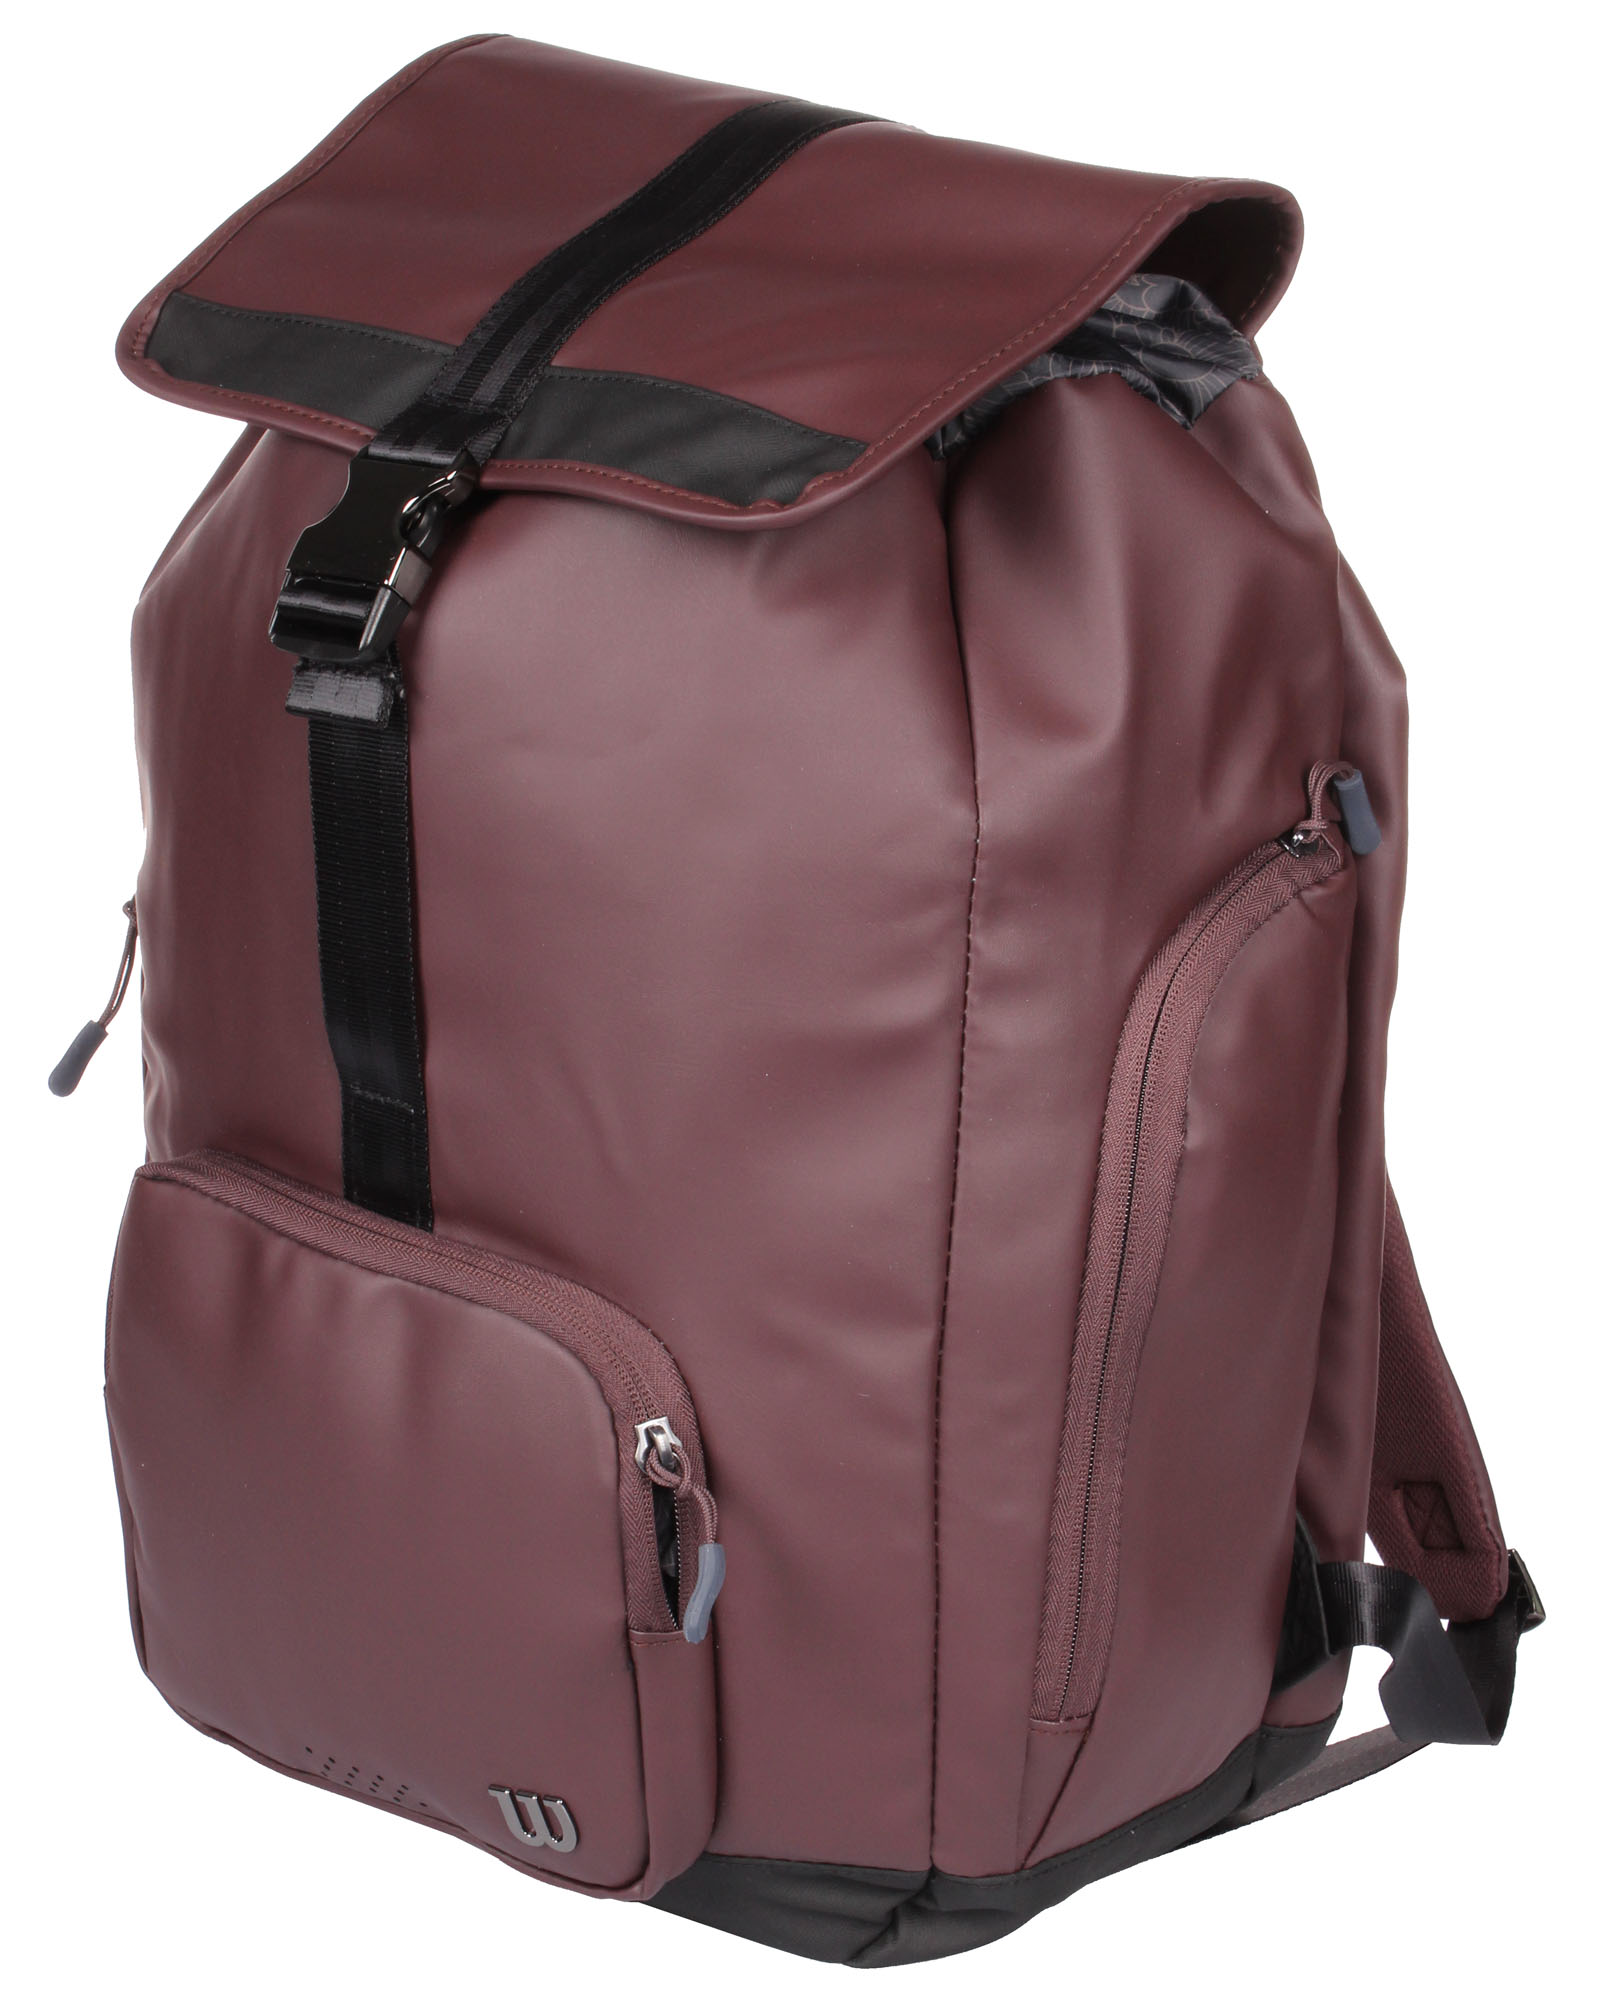 BALO THỂ THAO WILSON WOMEN'S FOLD OVER BACKPACK WINE WR8003002001 (2020)